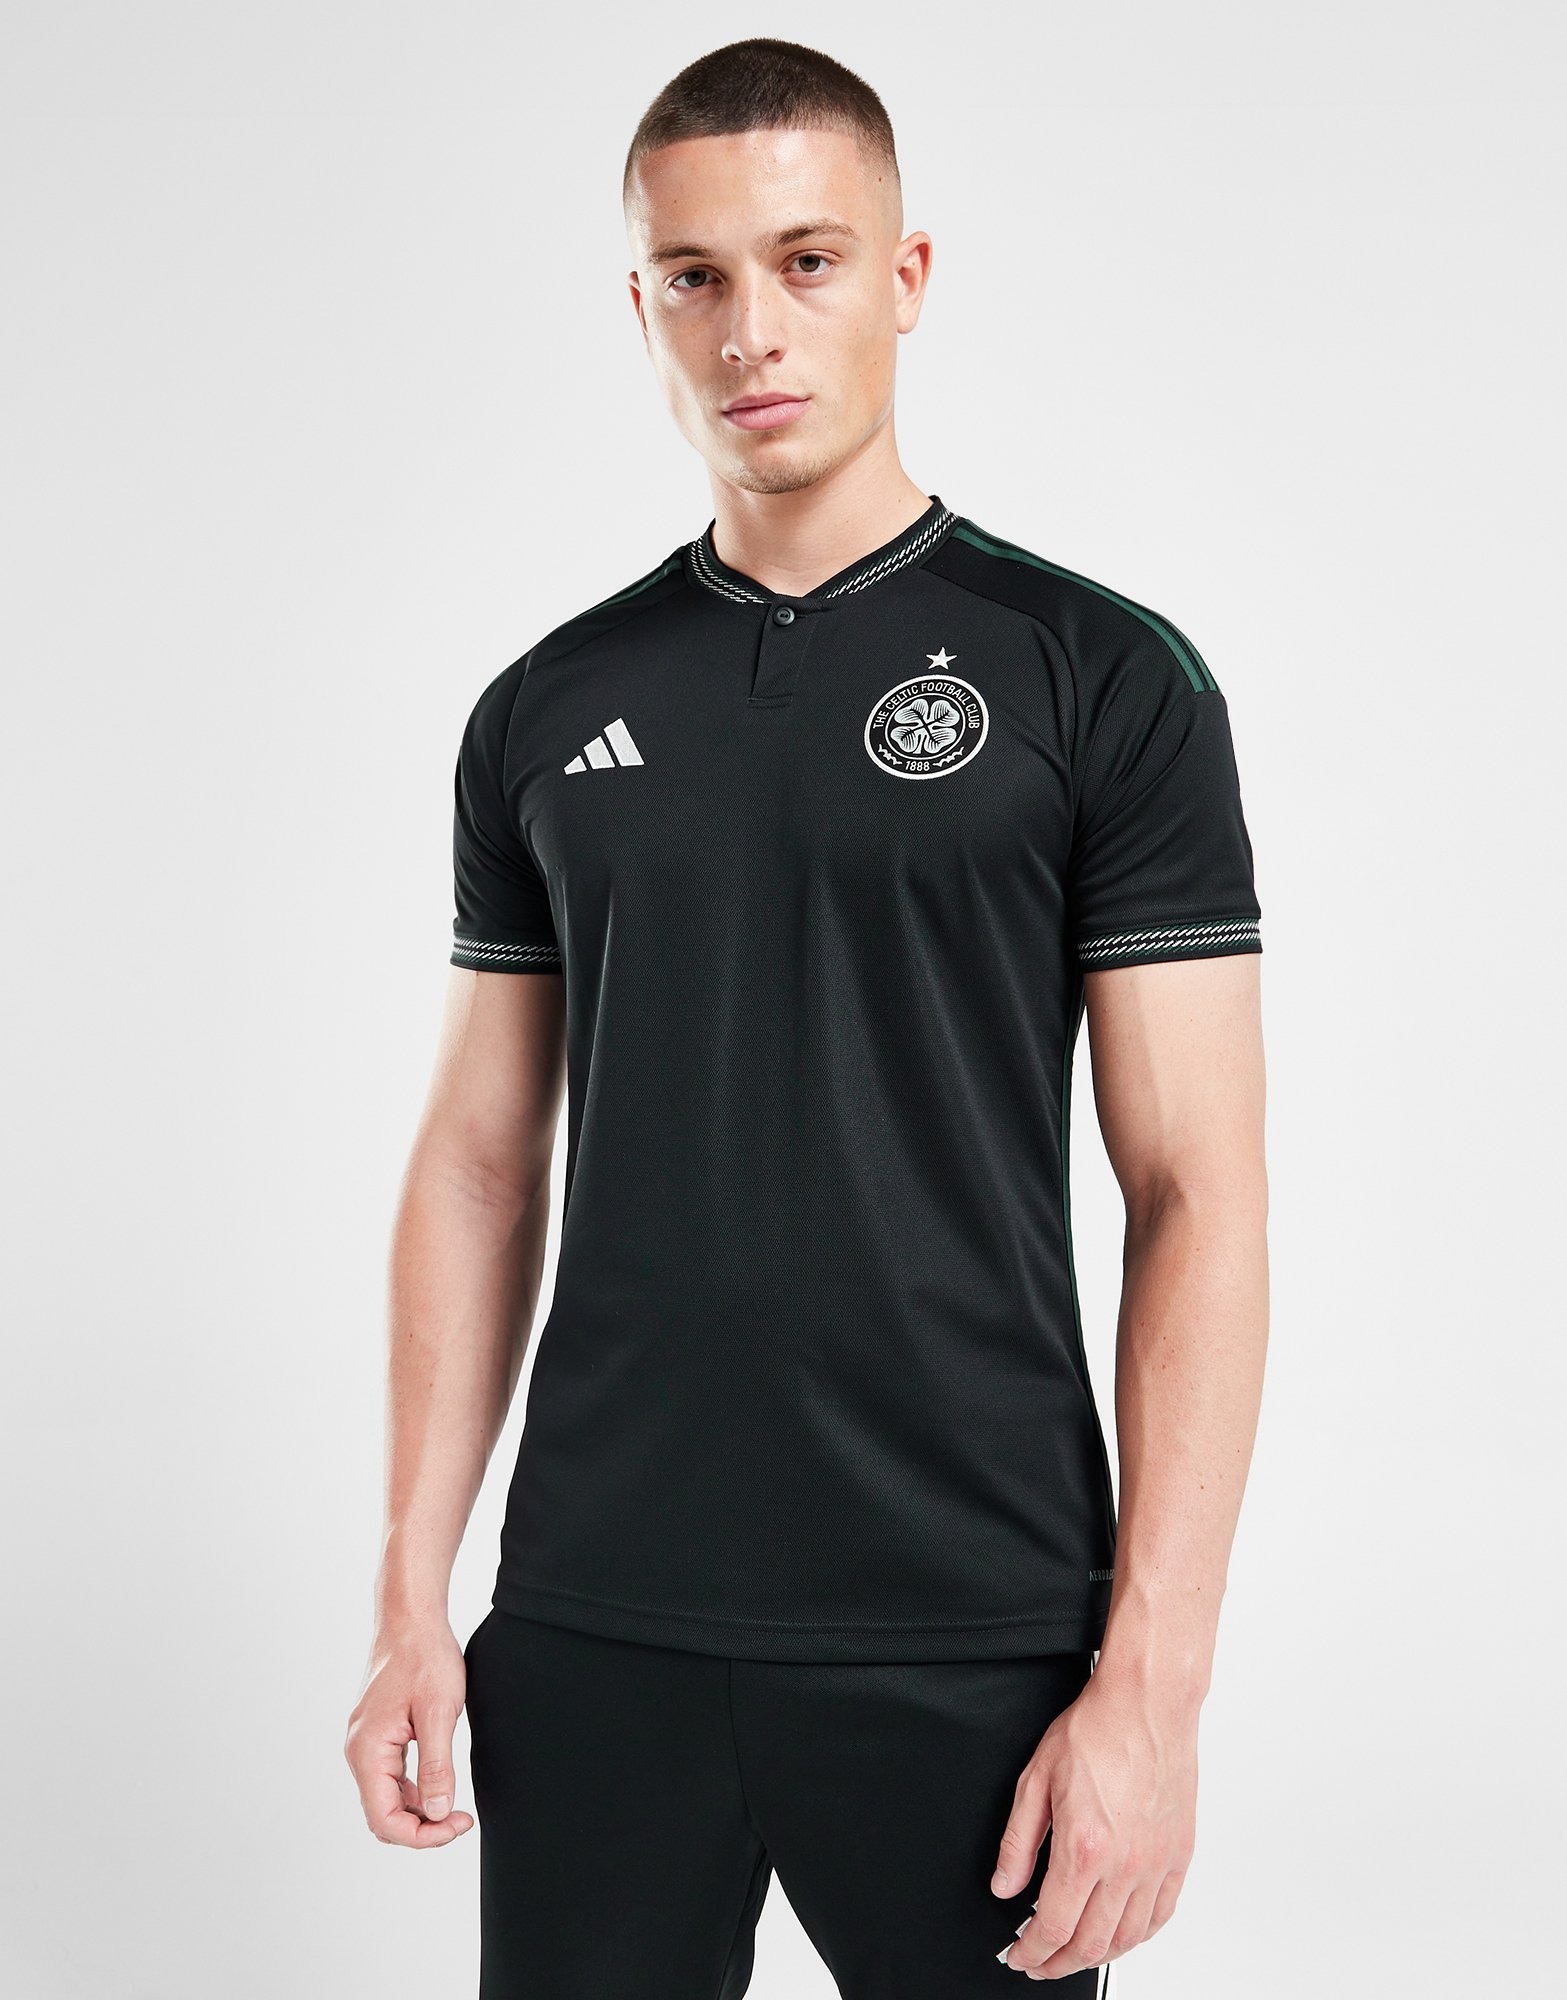 Celtic away kit for 22/23 season throws back to their Umbro days – Thick  Accent